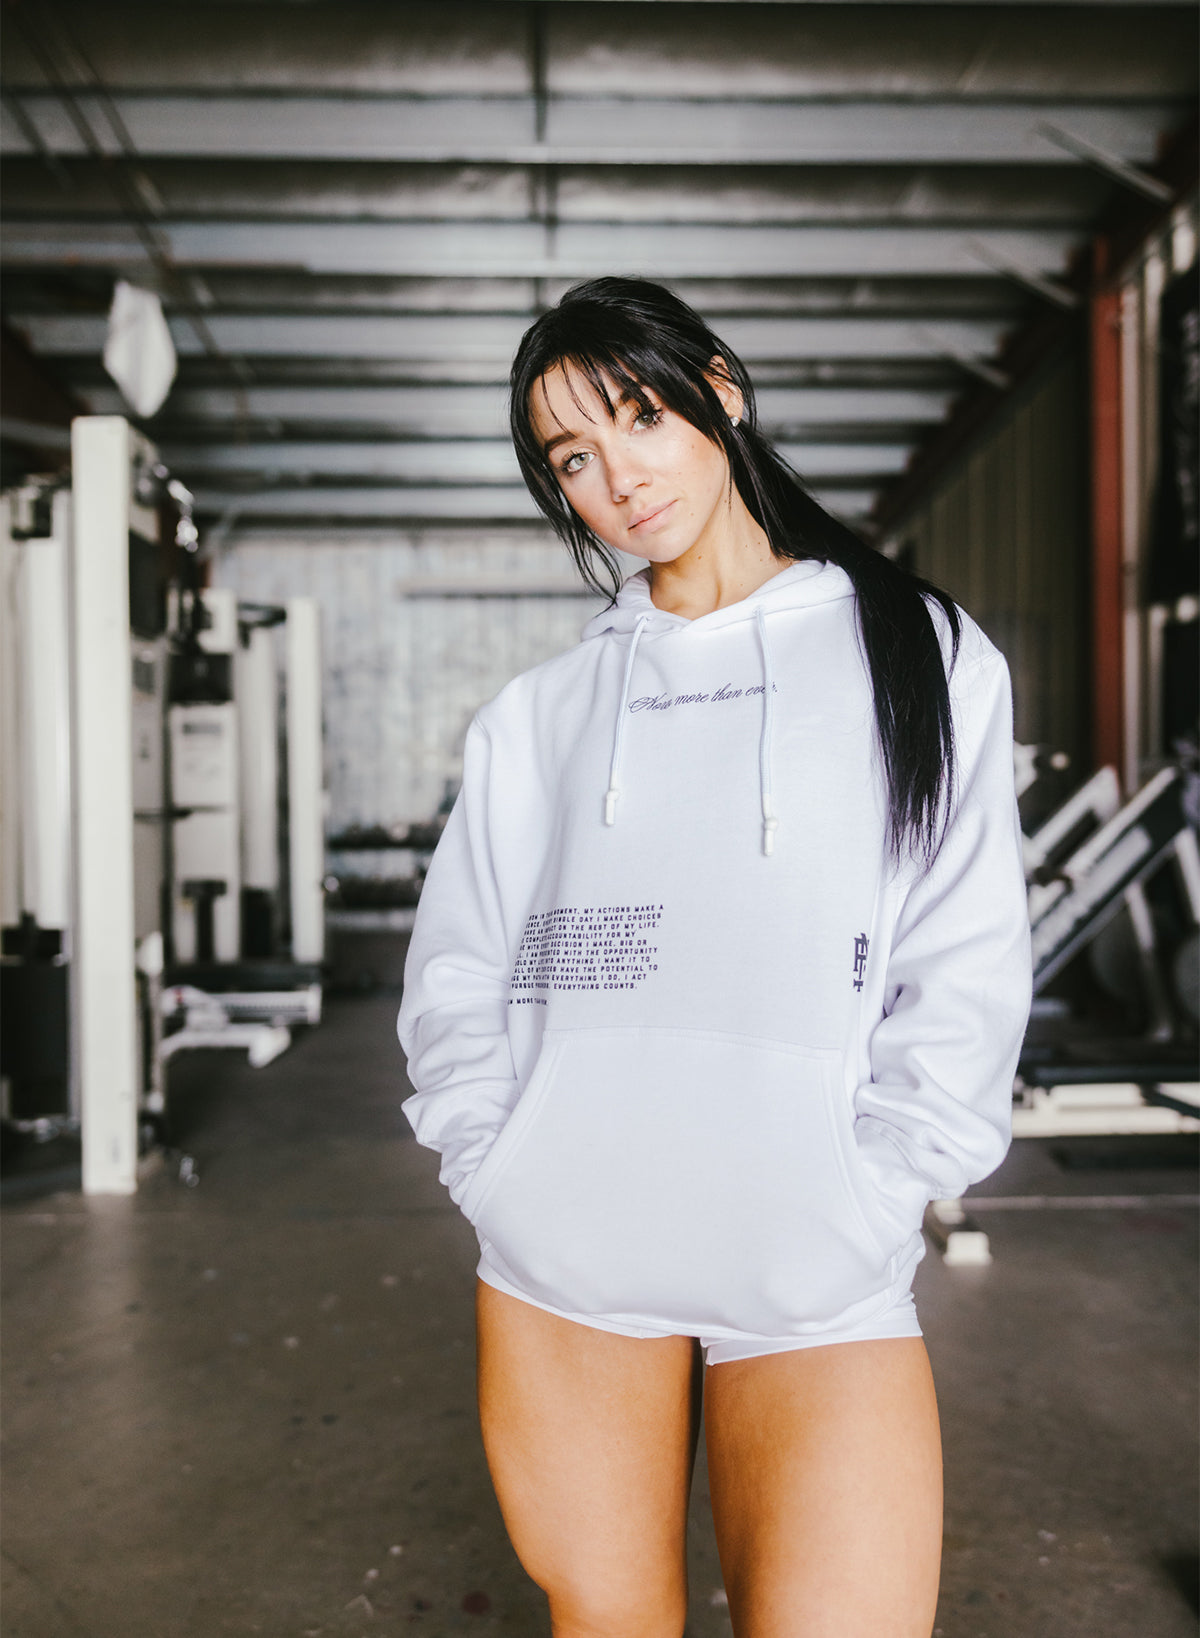 MORE THAN EVER HOODIE - WHITE